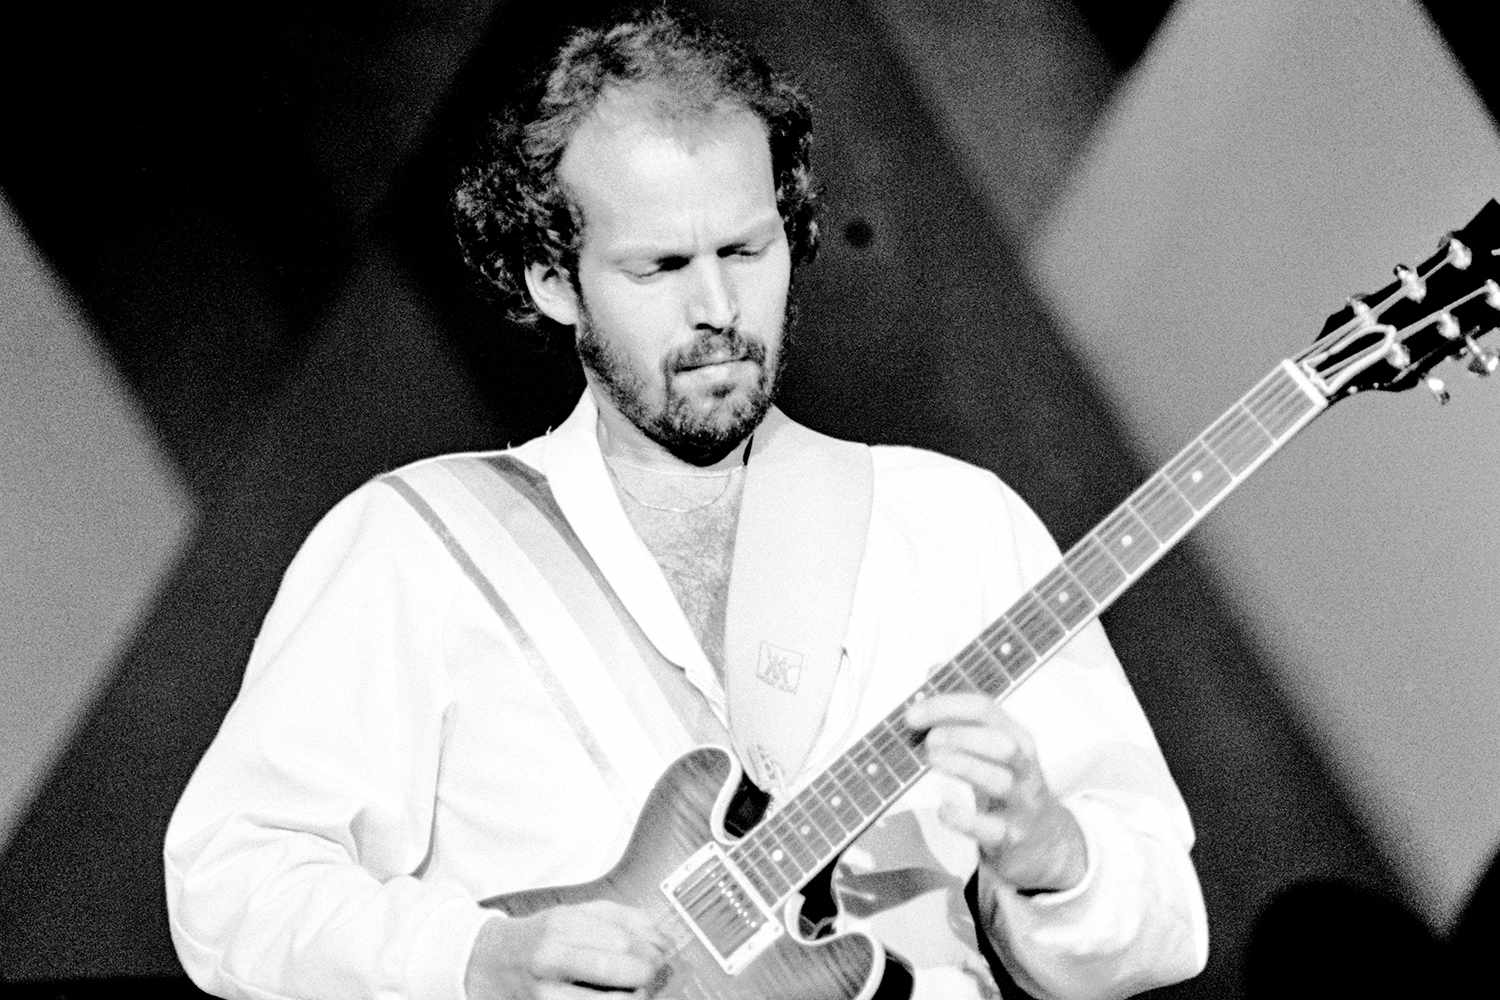 Lasse Wellander performs with ABBA at London's Wembley Arena in 1979